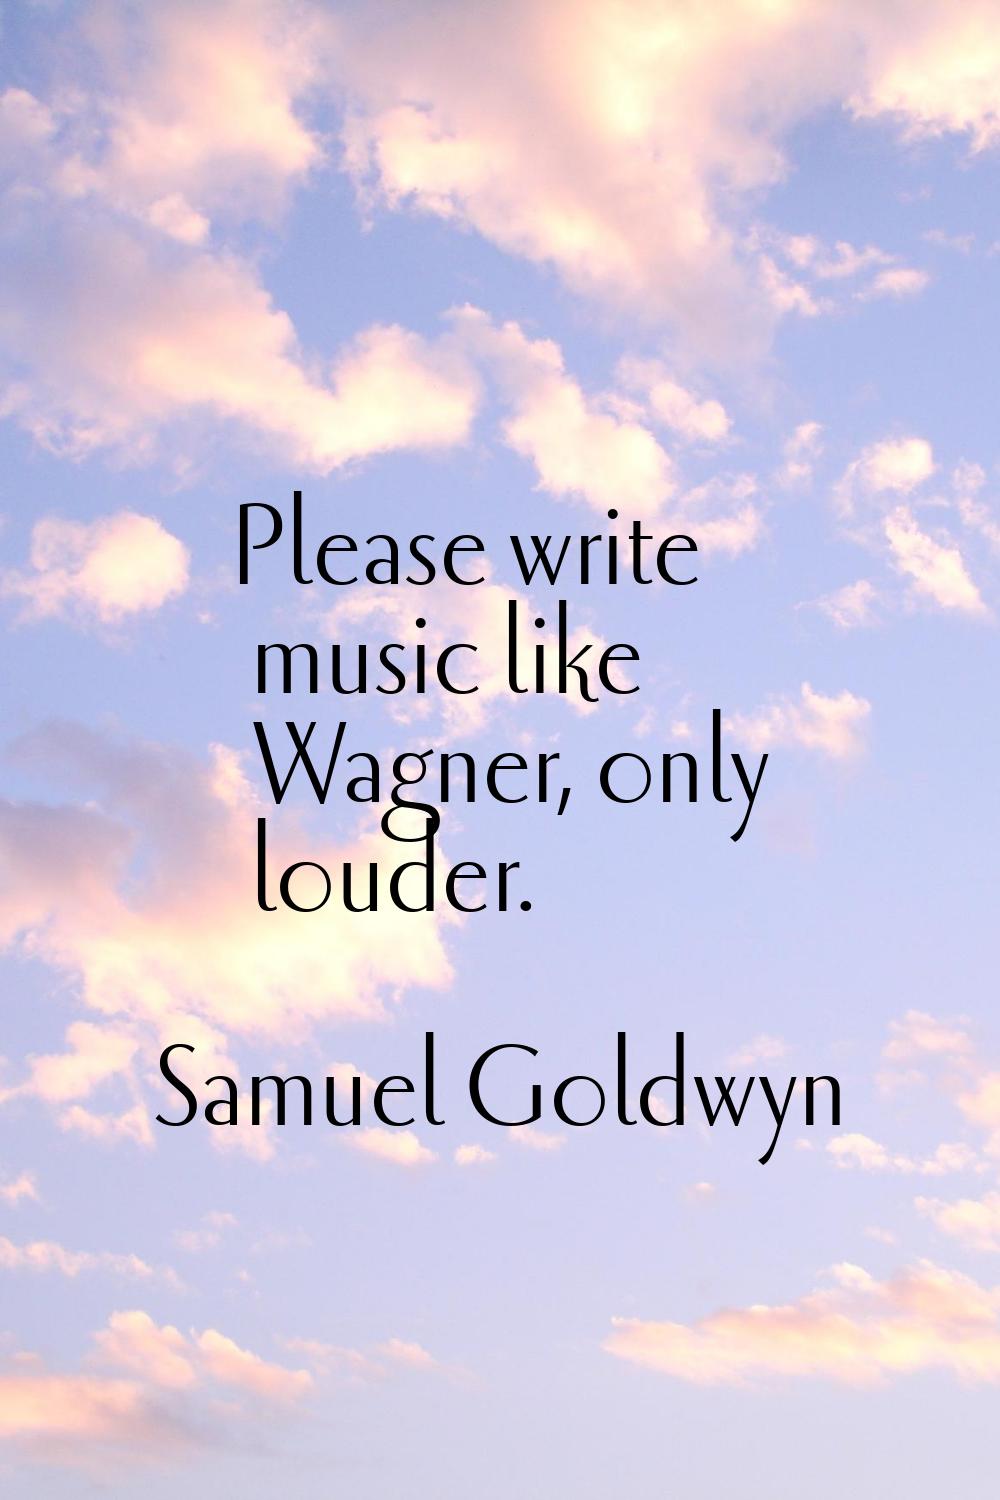 Please write music like Wagner, only louder.